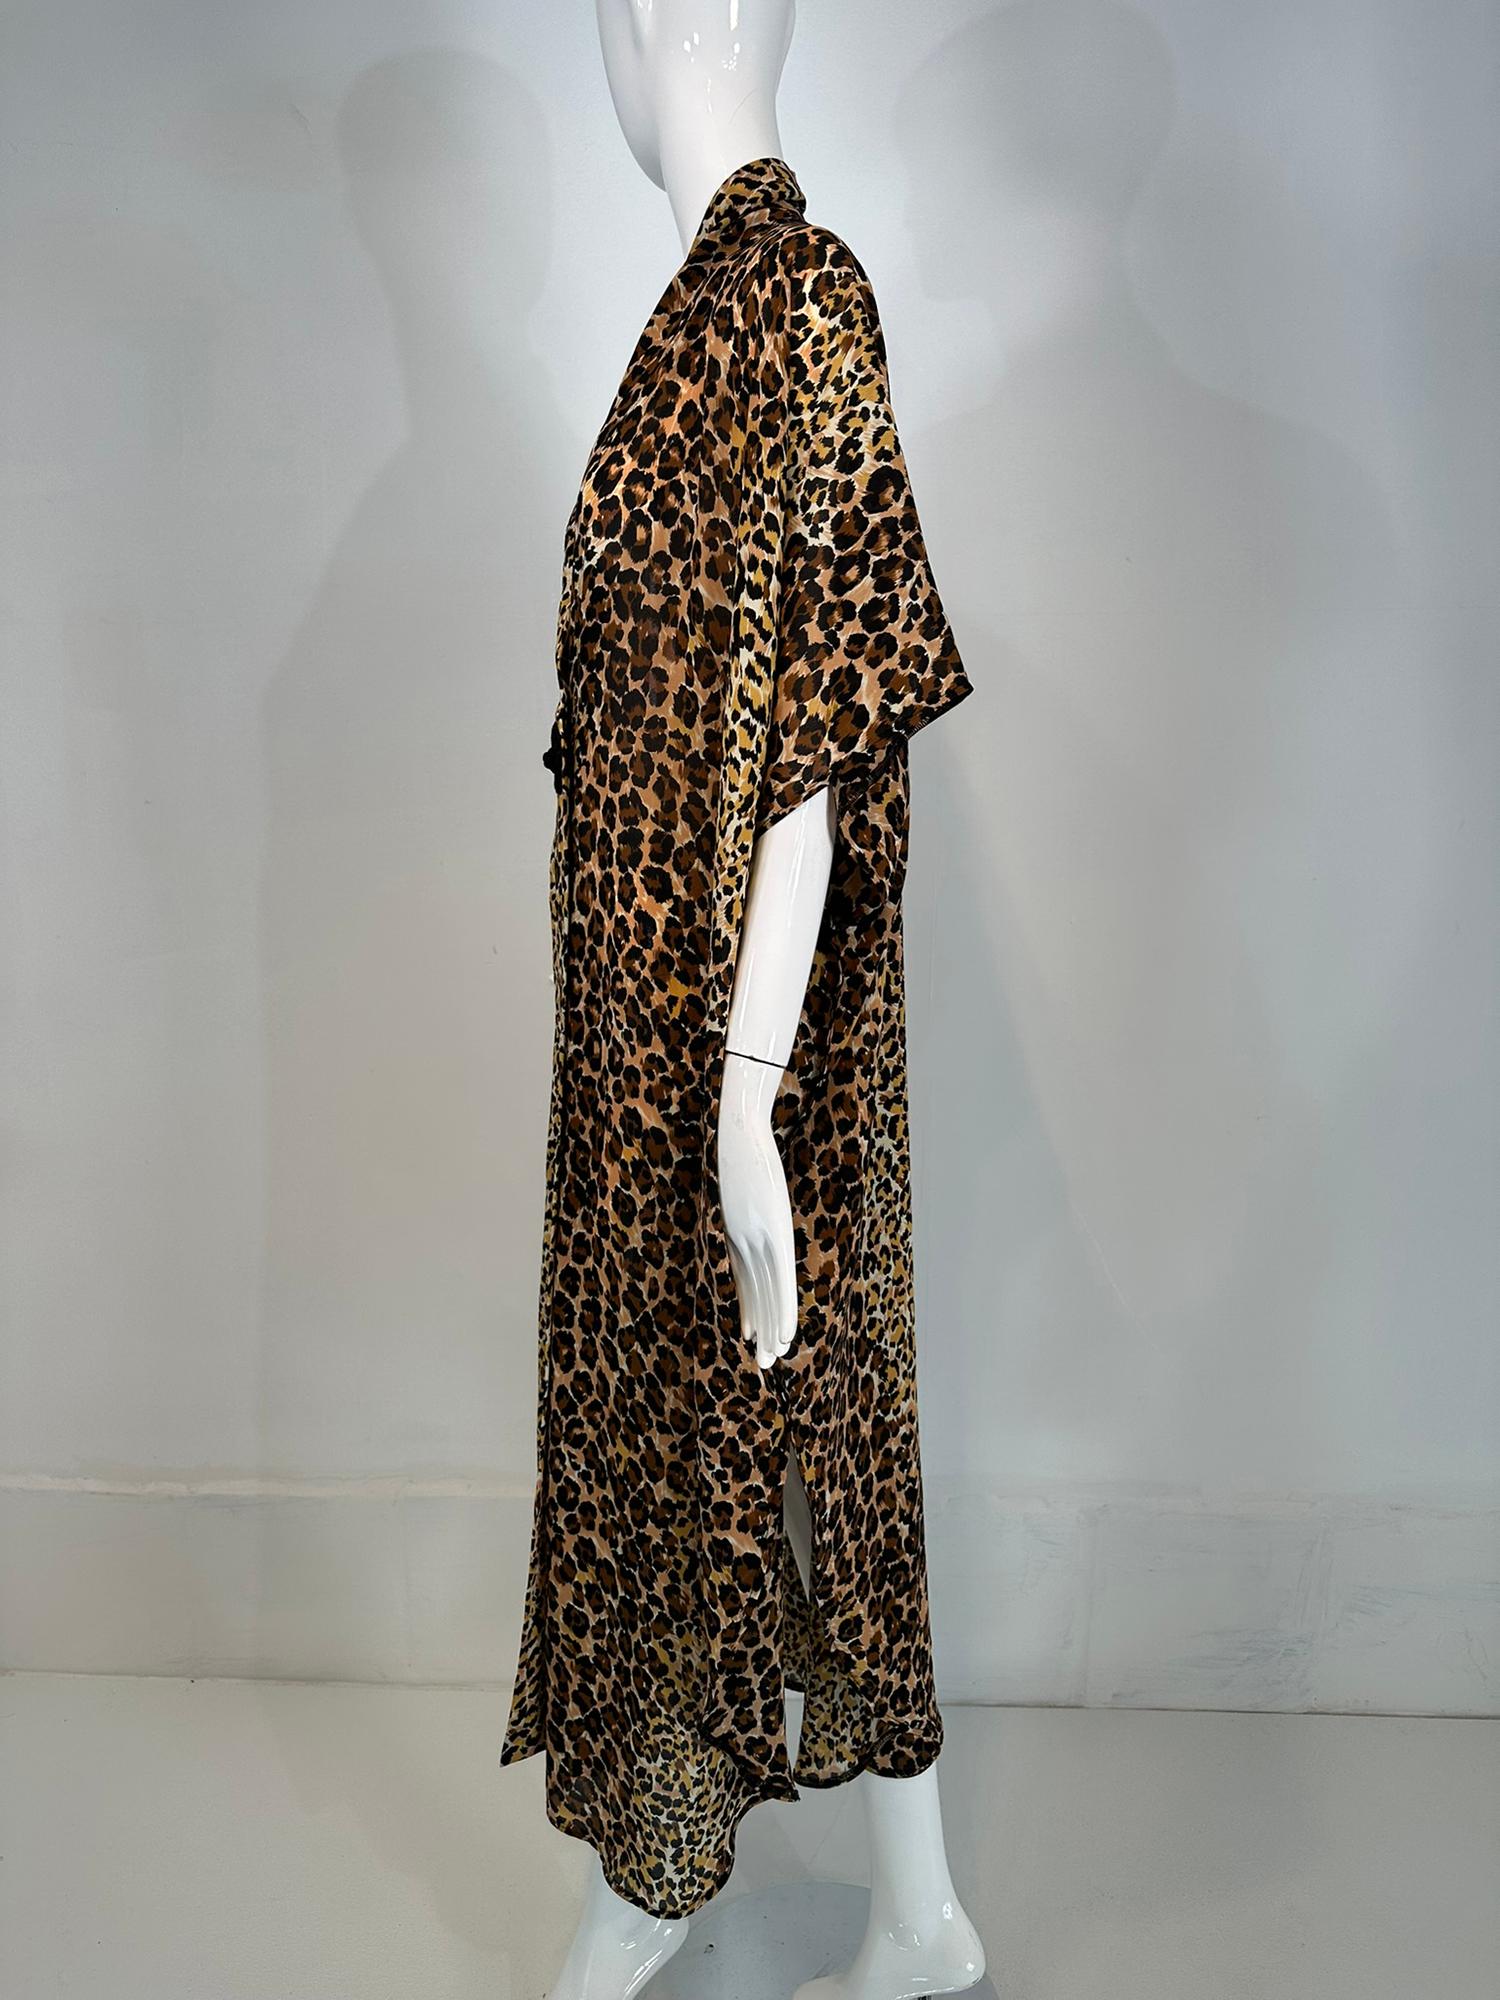 1960s Leopard Pint Crepe Caftan Robe by Marjorie Ellin Inc.  In Good Condition For Sale In West Palm Beach, FL